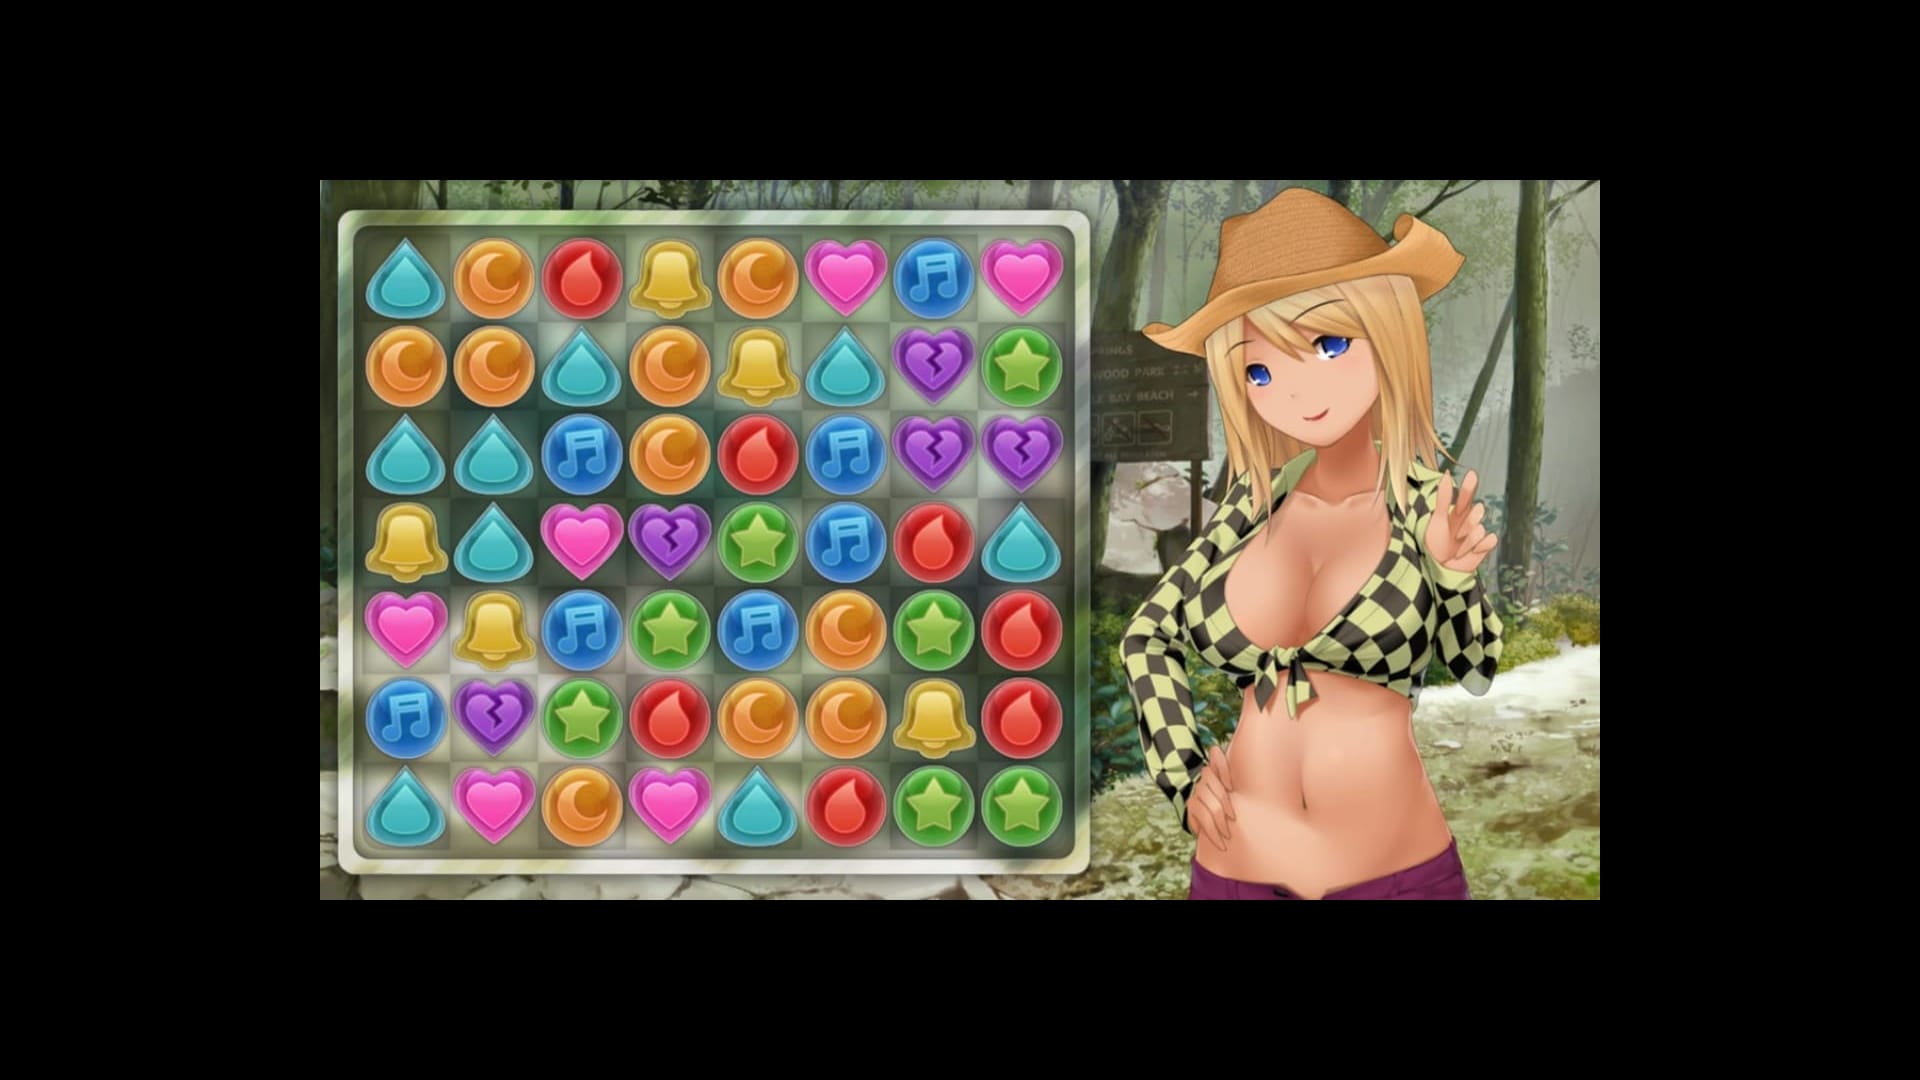 Nude Beach Sex Hentai - Updated] HuniePop and Other Adult Games Facing Removal From Steam Store |  TechRaptor